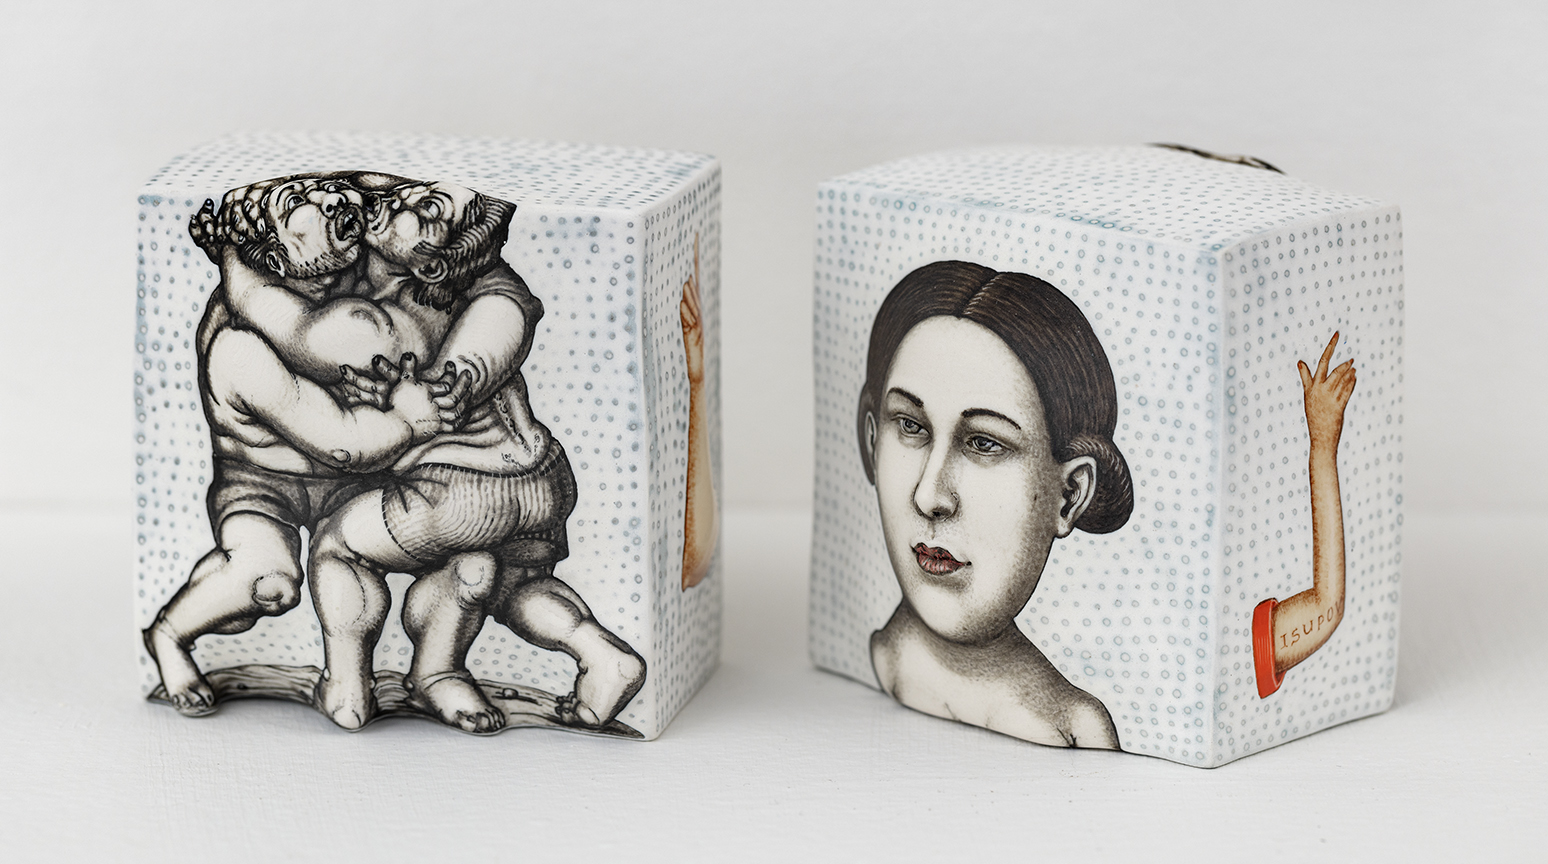 Sergei Isupov, "Principle", 2023, porcelain, glaze, 3.5 x 3.5 x 3.5 each - group of two works from the Principle series of Isupov Small Works, both shaped like imperfect pillow cubes, one including a drawing of fight between two men, the other with a drawing of a woman's face, both including depictions of arms on the sides